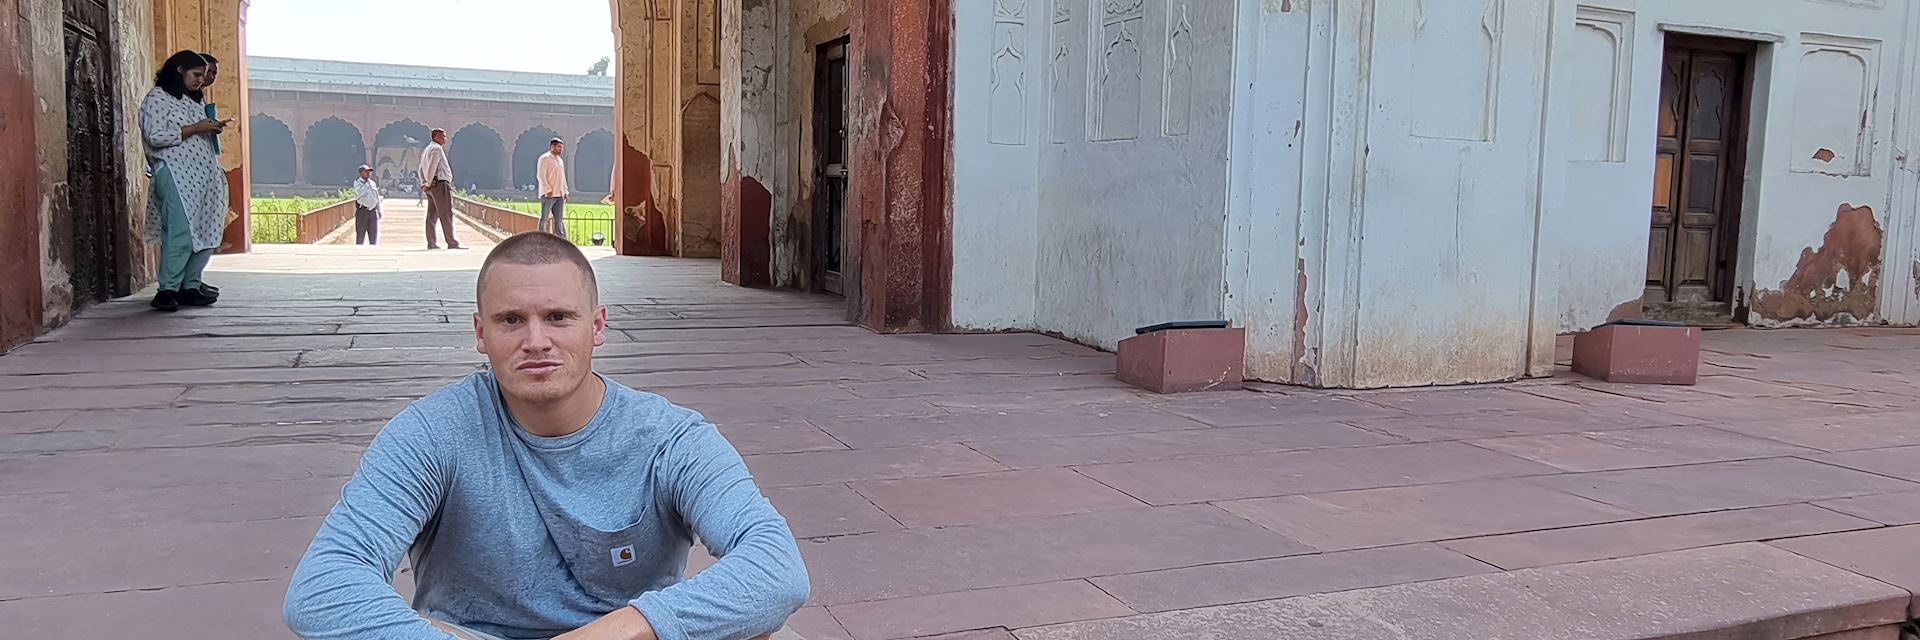 Andy at the Red Fort, Delhi, India